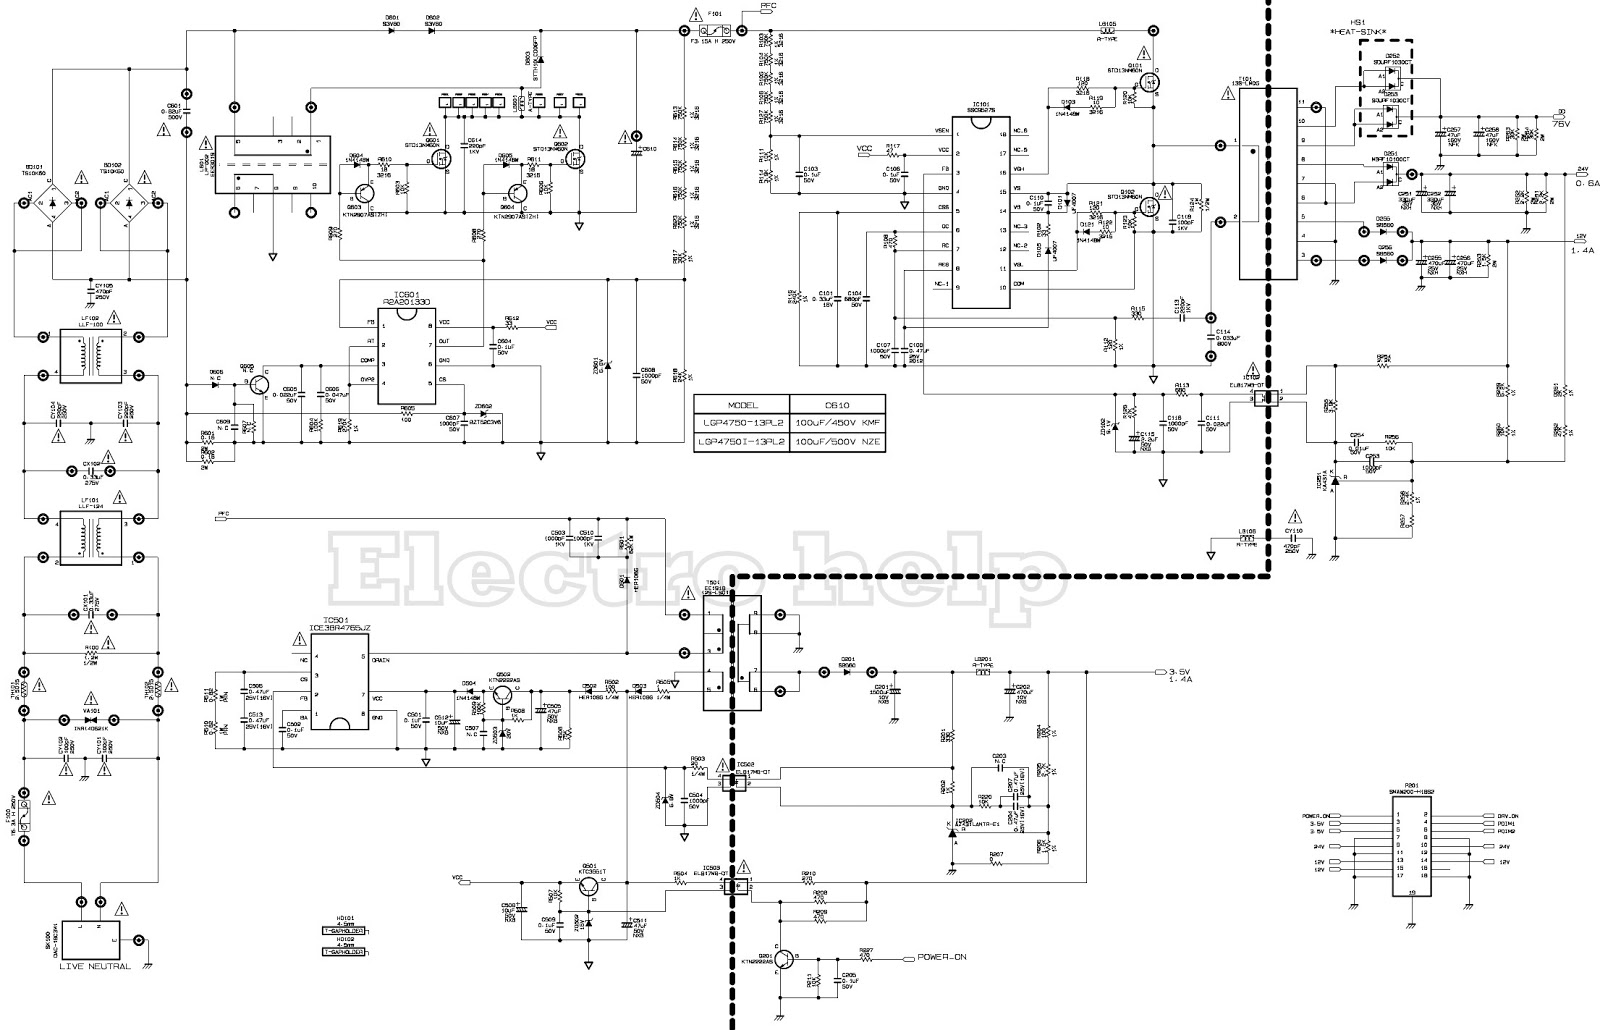 LG POWER SUPPLY - EAY62810801 - SCHEMATIC - LED LCD TV ...